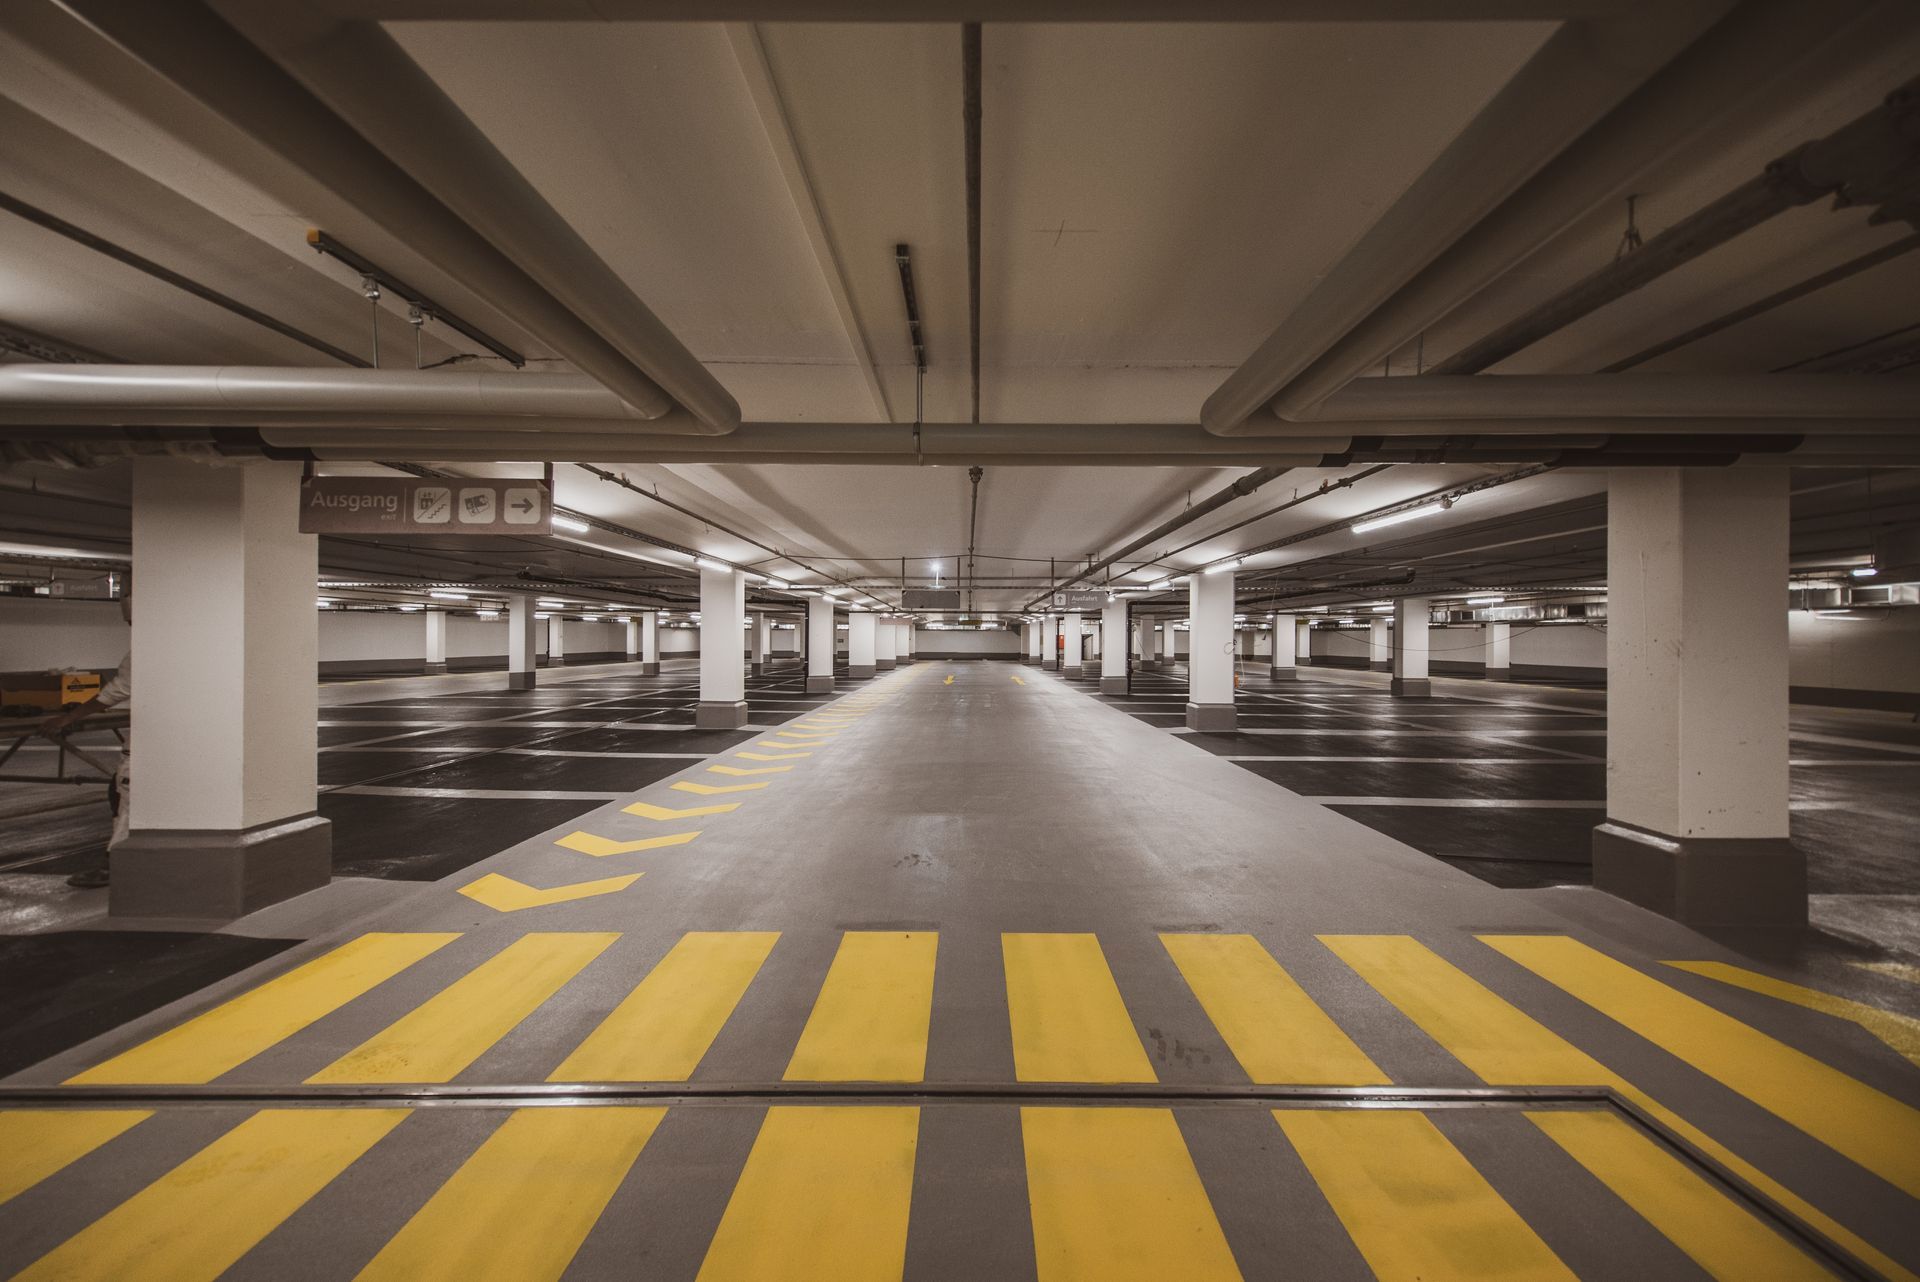 An empty underground parking lot in a shopping mall, with rows of vacant parking spaces and dimly lit surroundings.